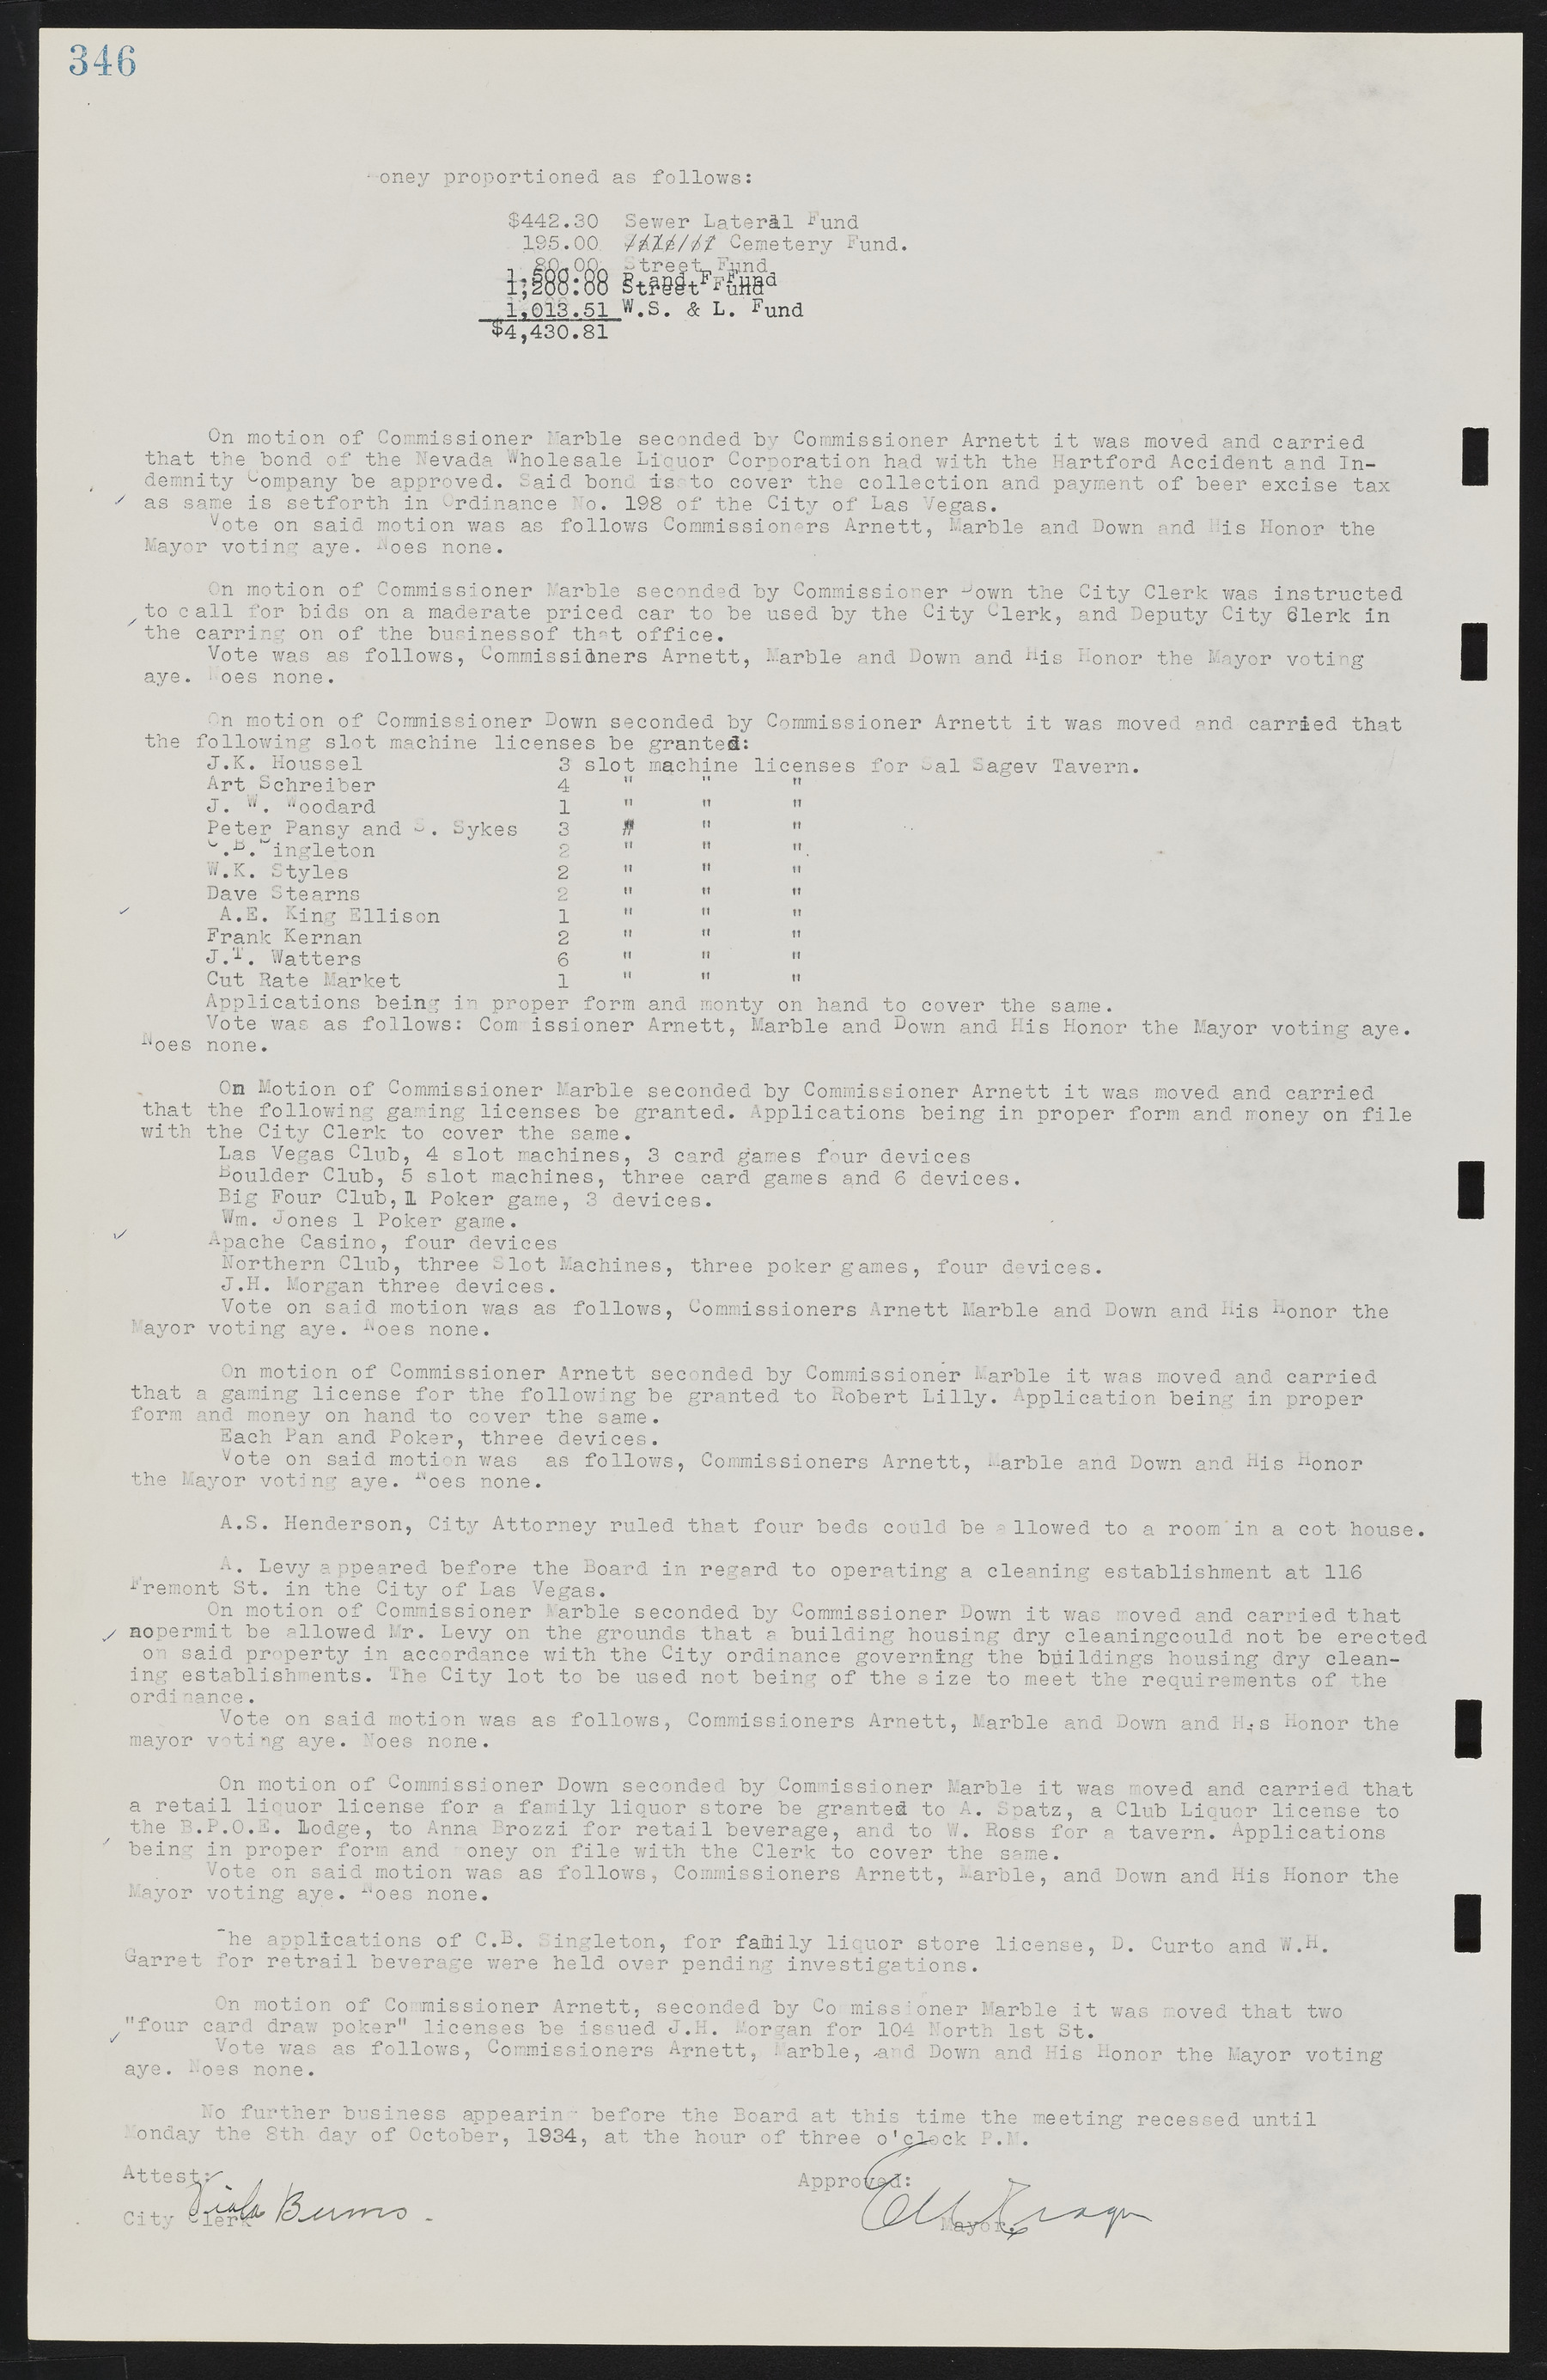 Las Vegas City Commission Minutes, May 14, 1929 to February 11, 1937, lvc000003-353